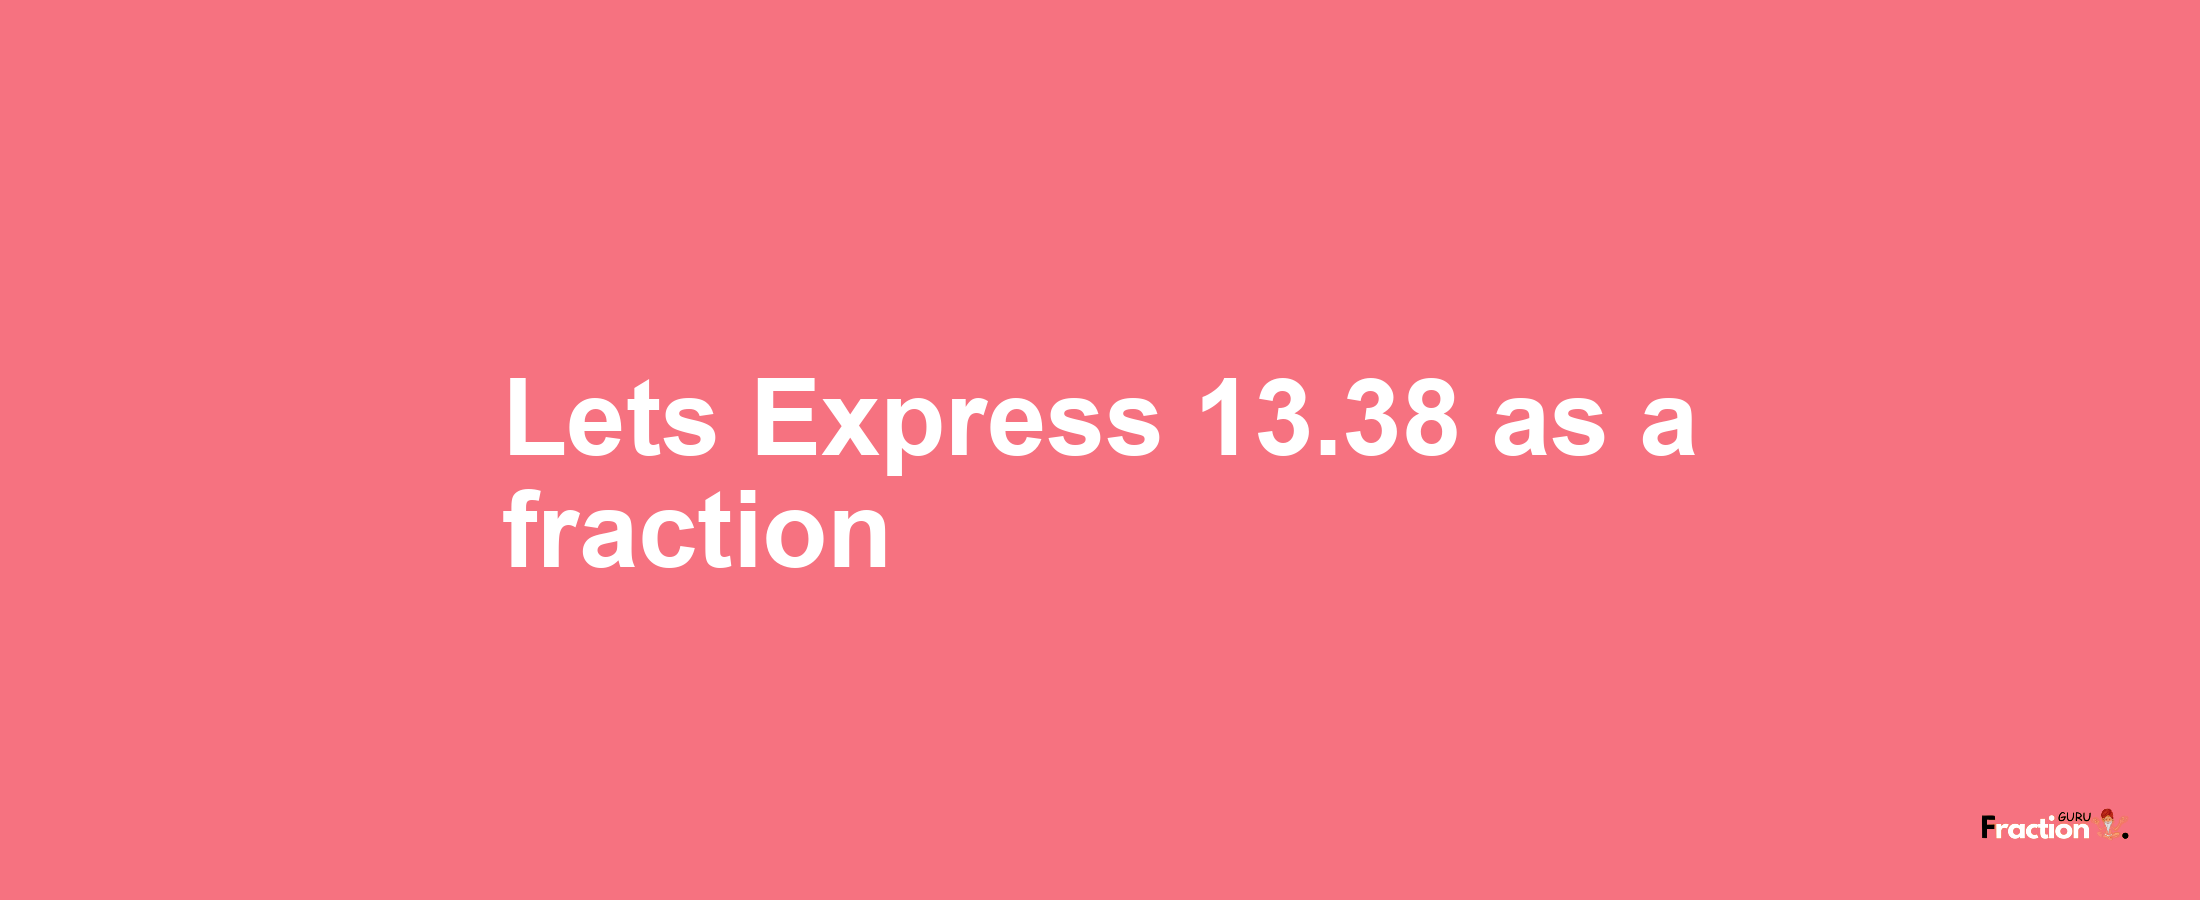 Lets Express 13.38 as afraction